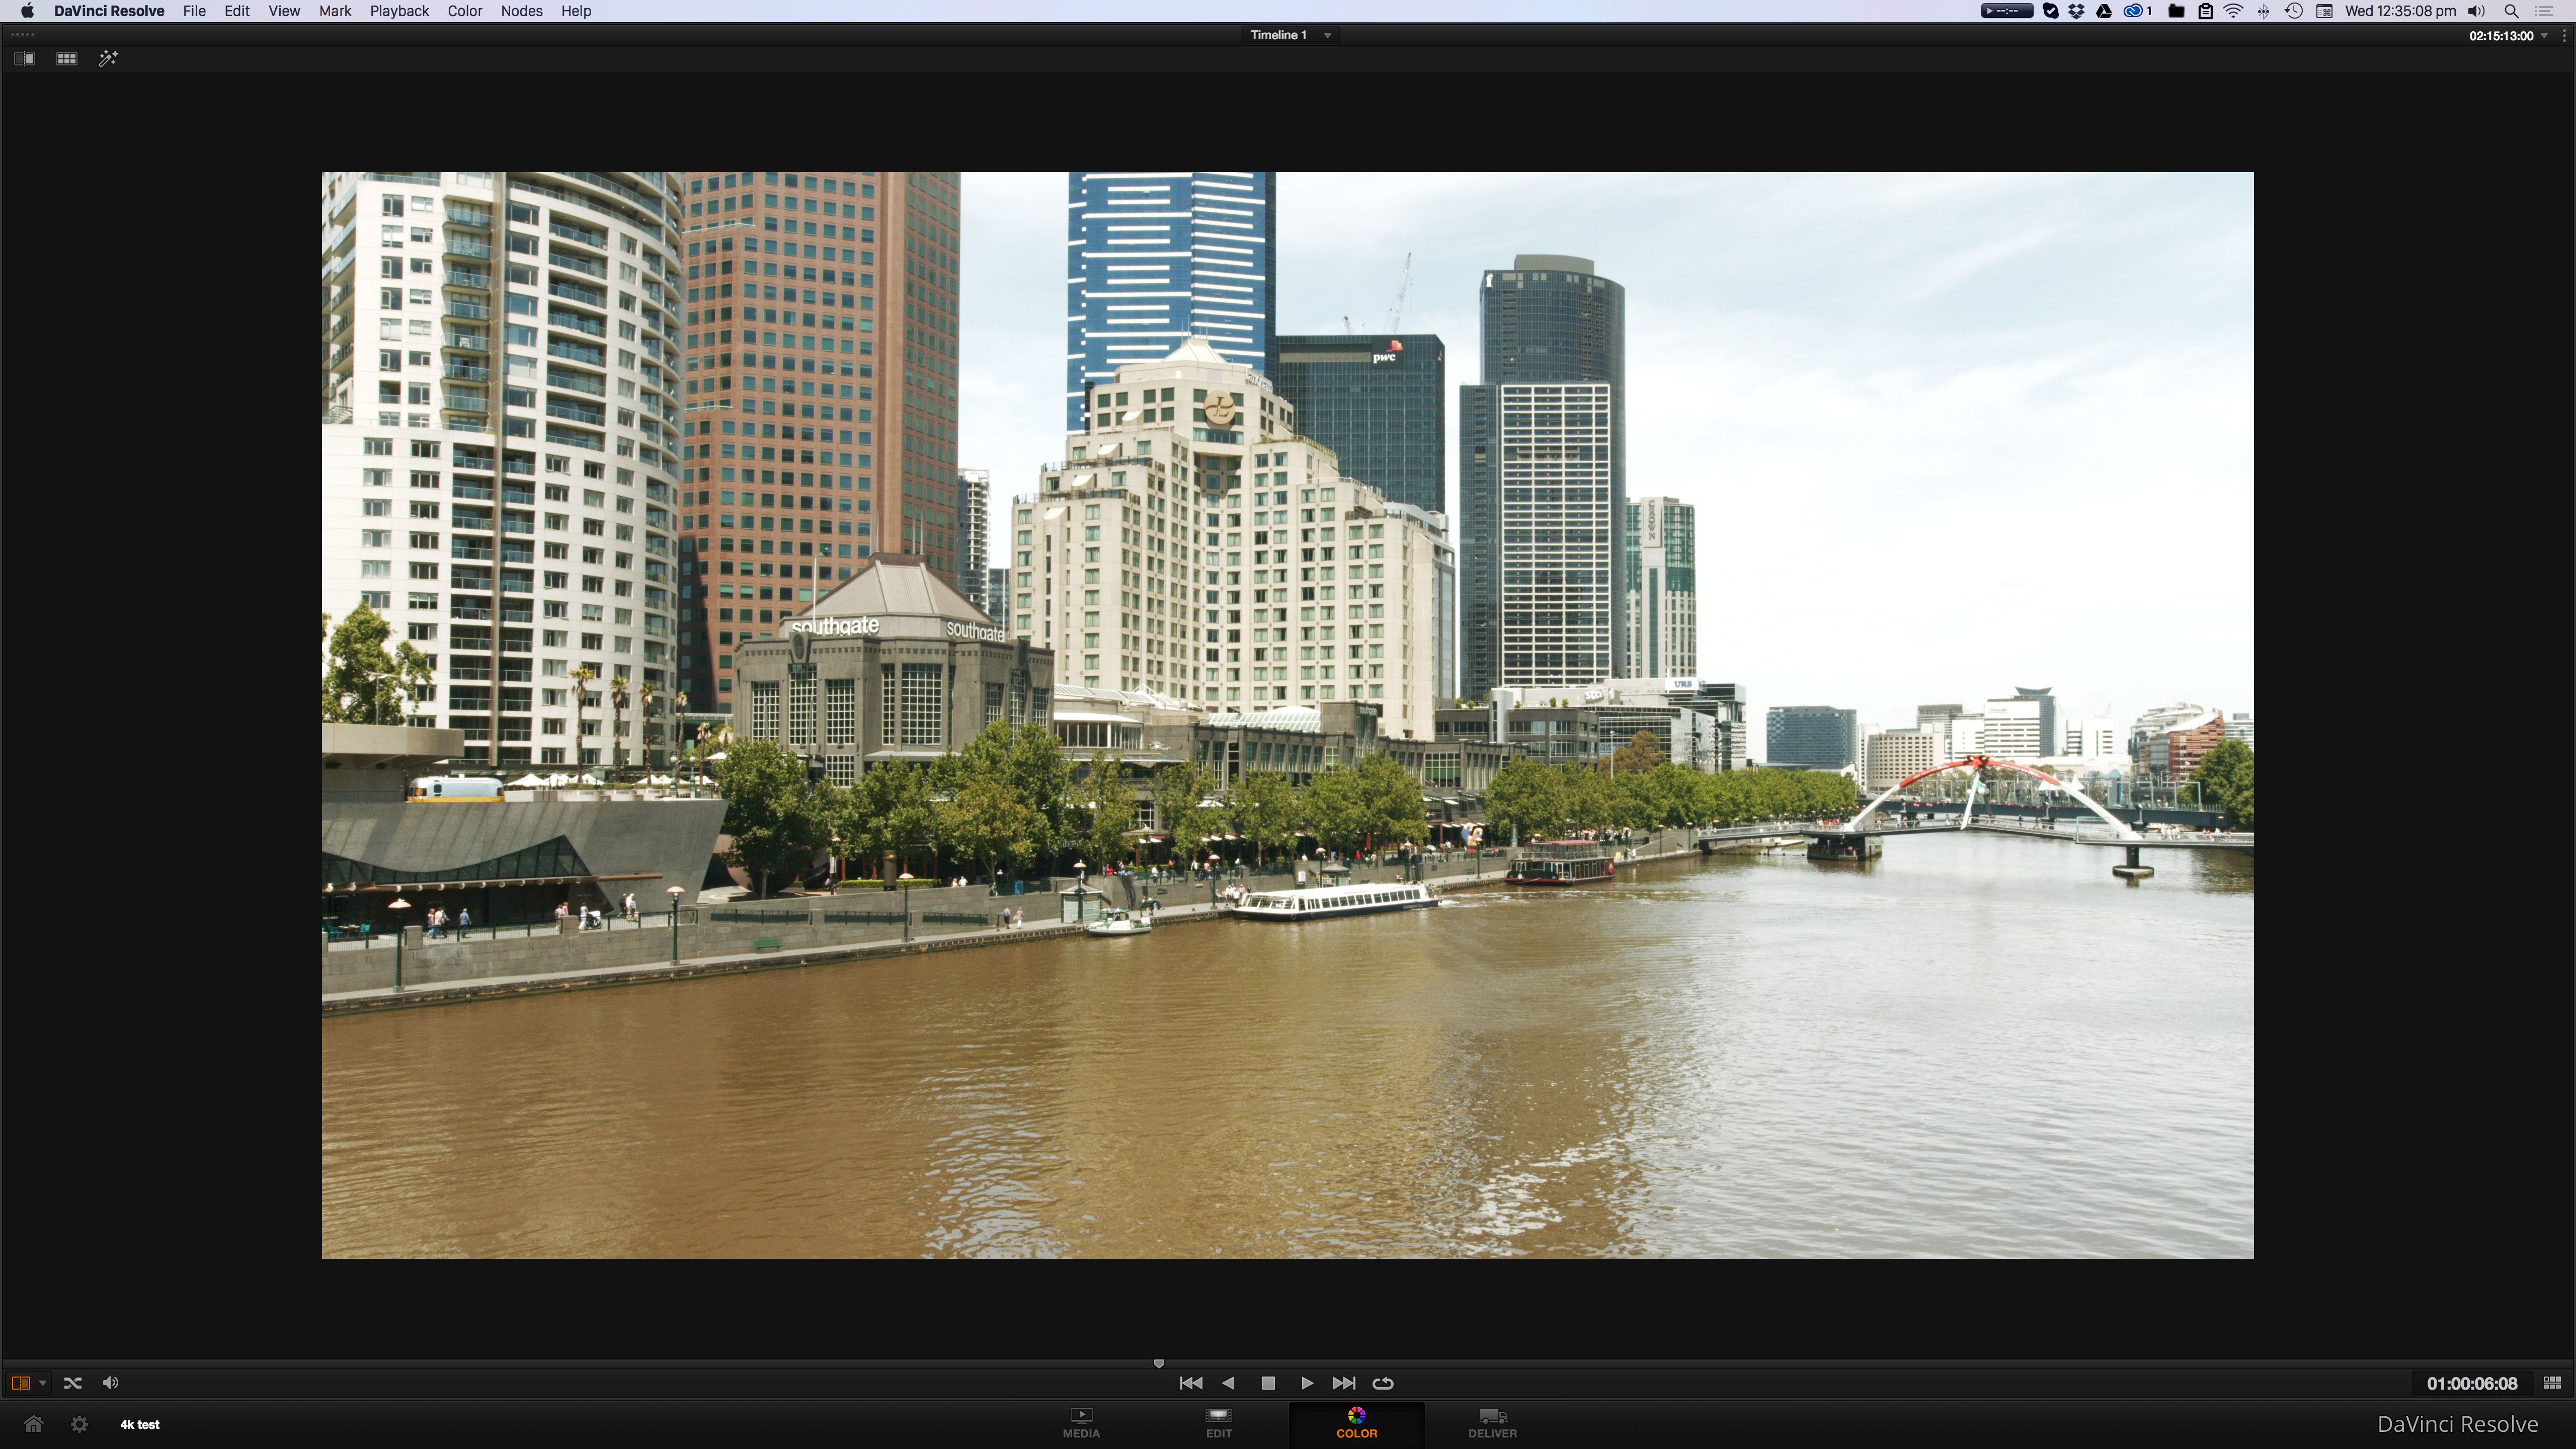 Here's some Blackmagic 4K sample footage shown at 100%, with room to spare.